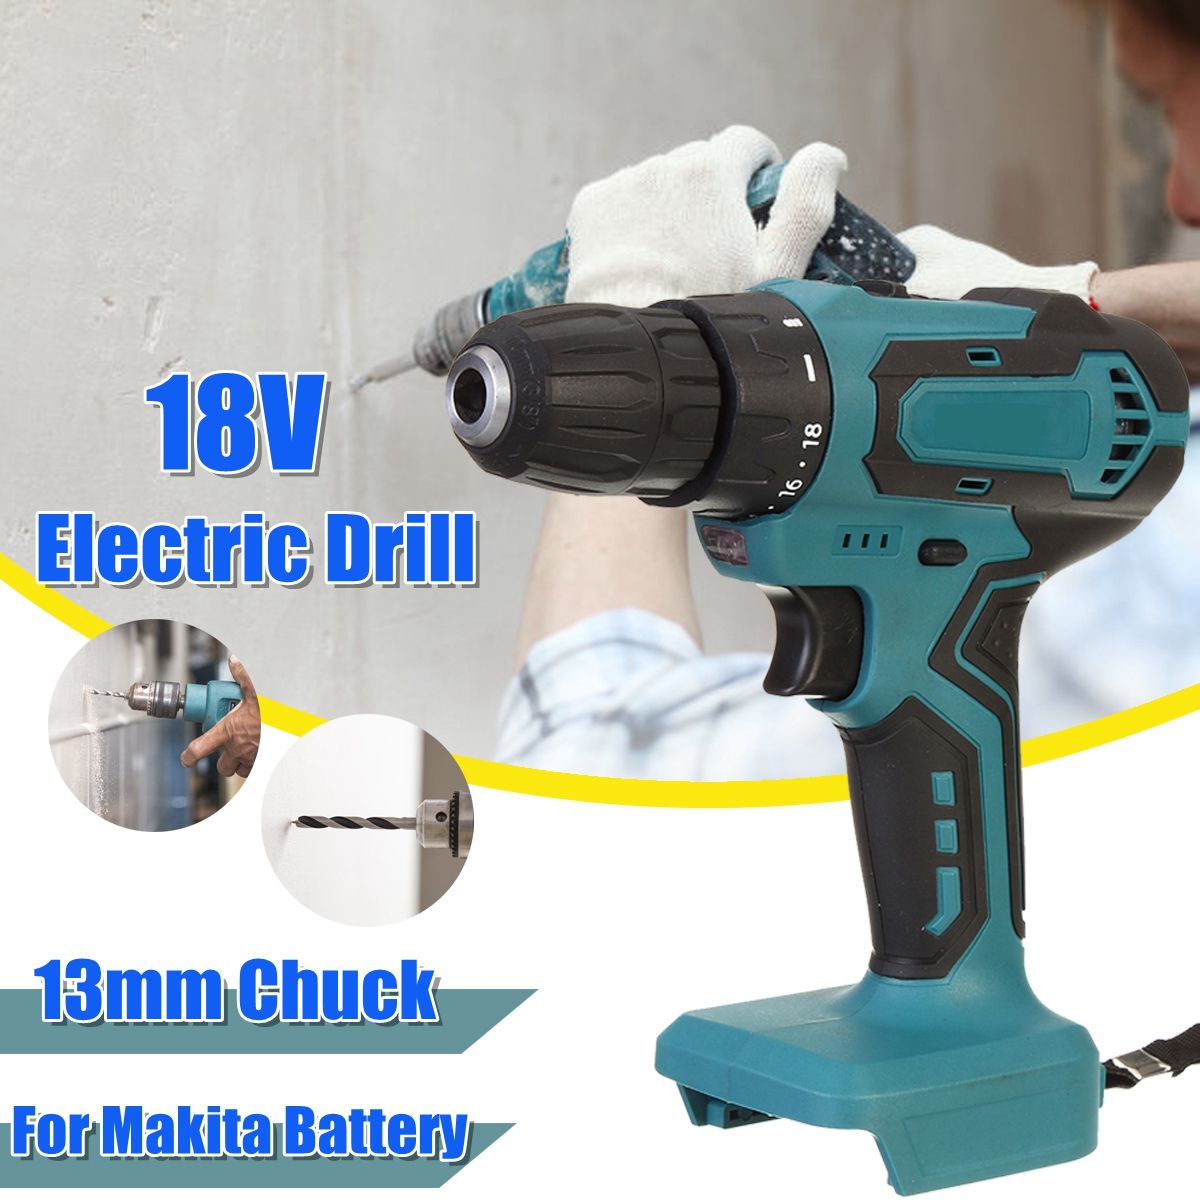 18V-13mm-Cordless-Electric-Drill-2-Speed-Screwdriver-For-Makita-Battery-1717184